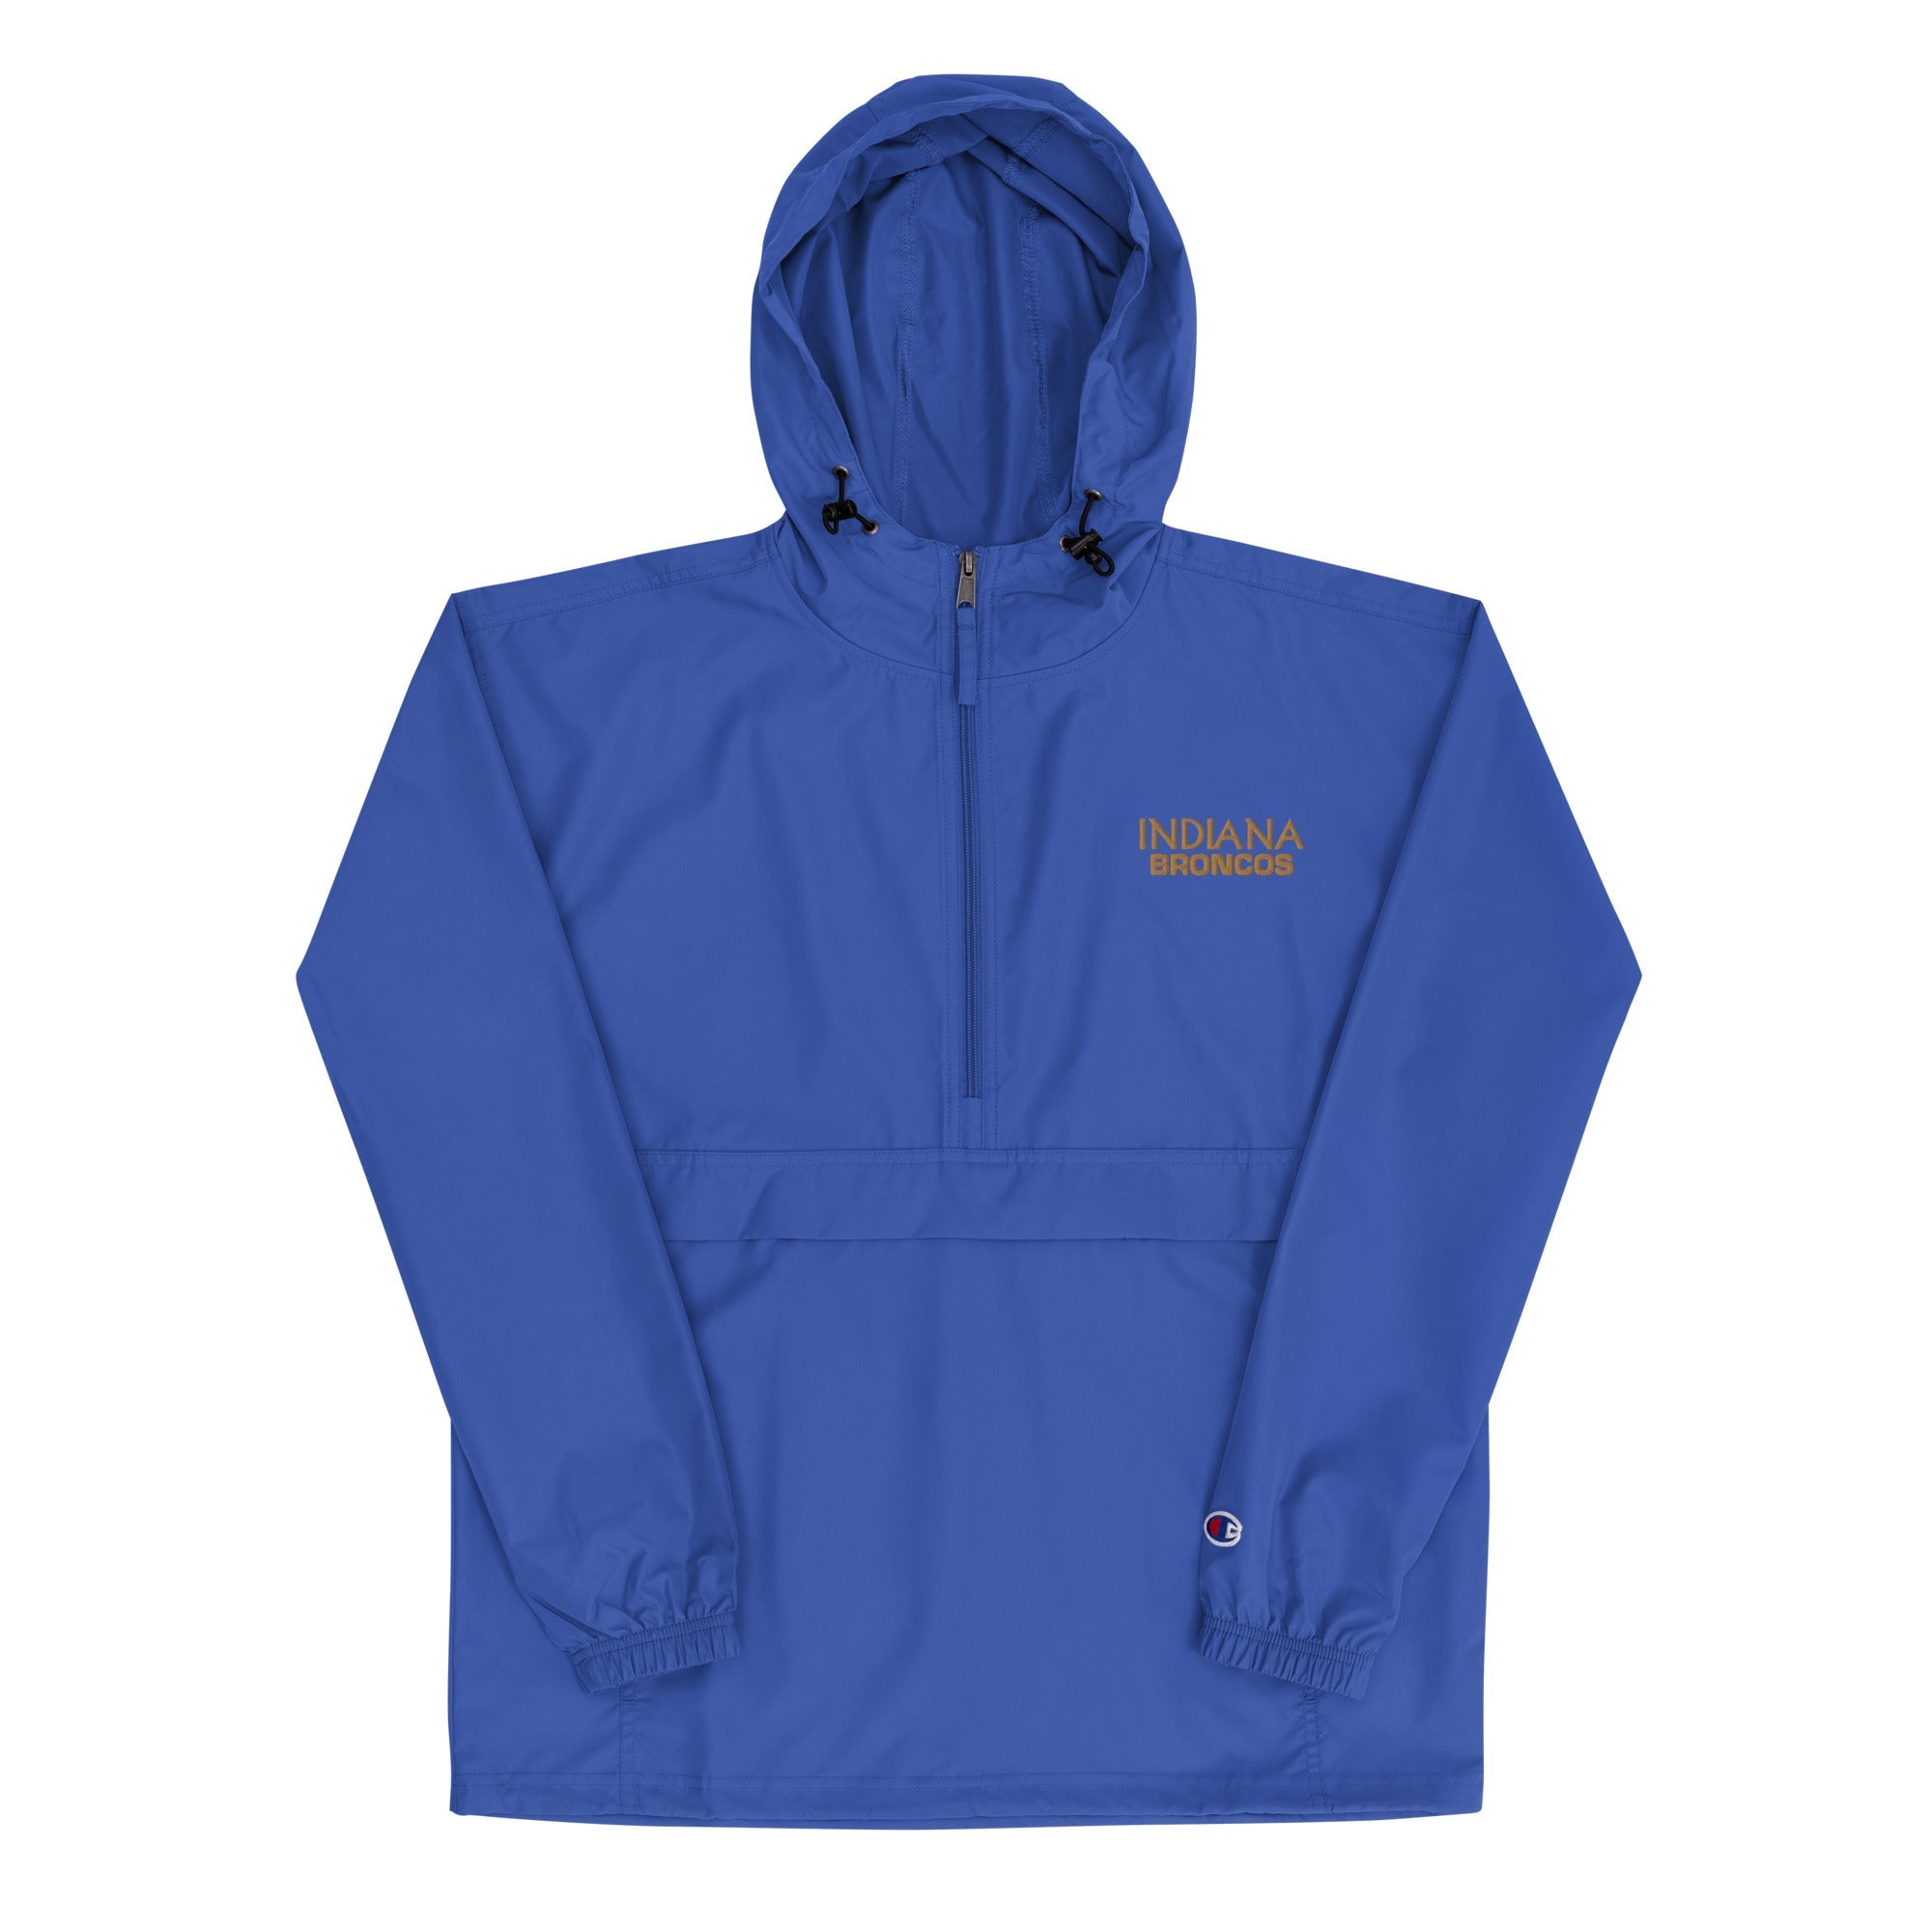 Indiana Broncos Embroidered Champion Packable Jacket